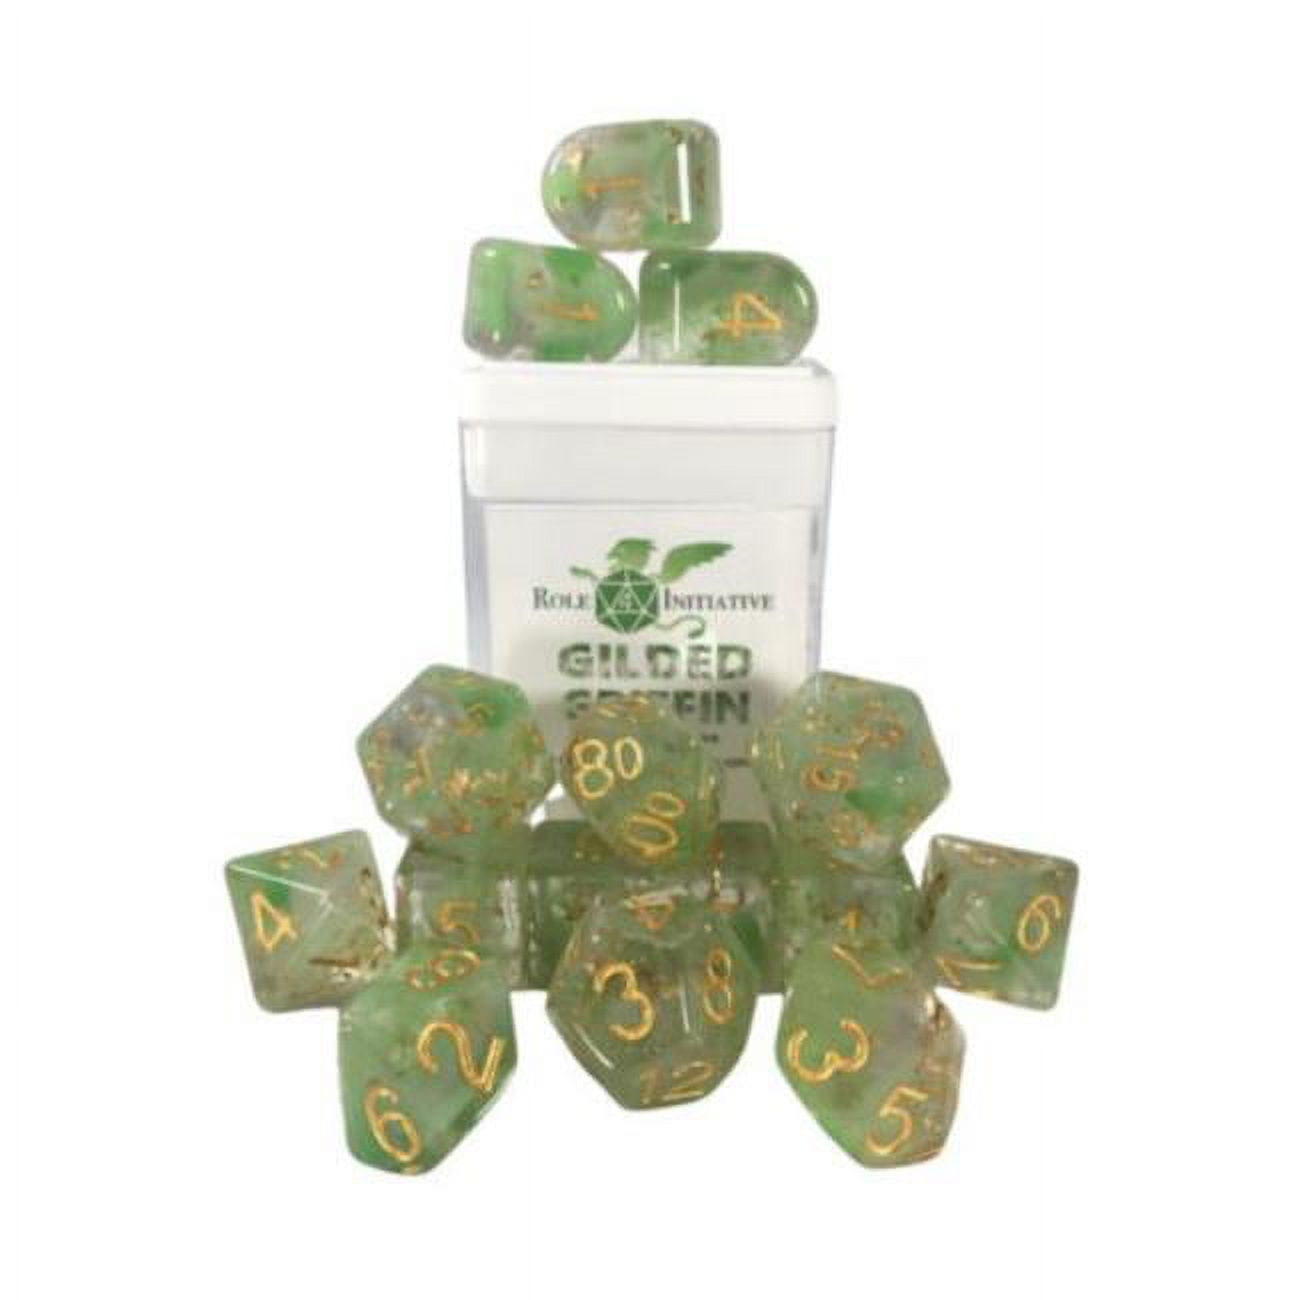 Picture of Role 4 Initiative R4I50540-FC-S Gilded Griffin SPR Dice, Set of 15